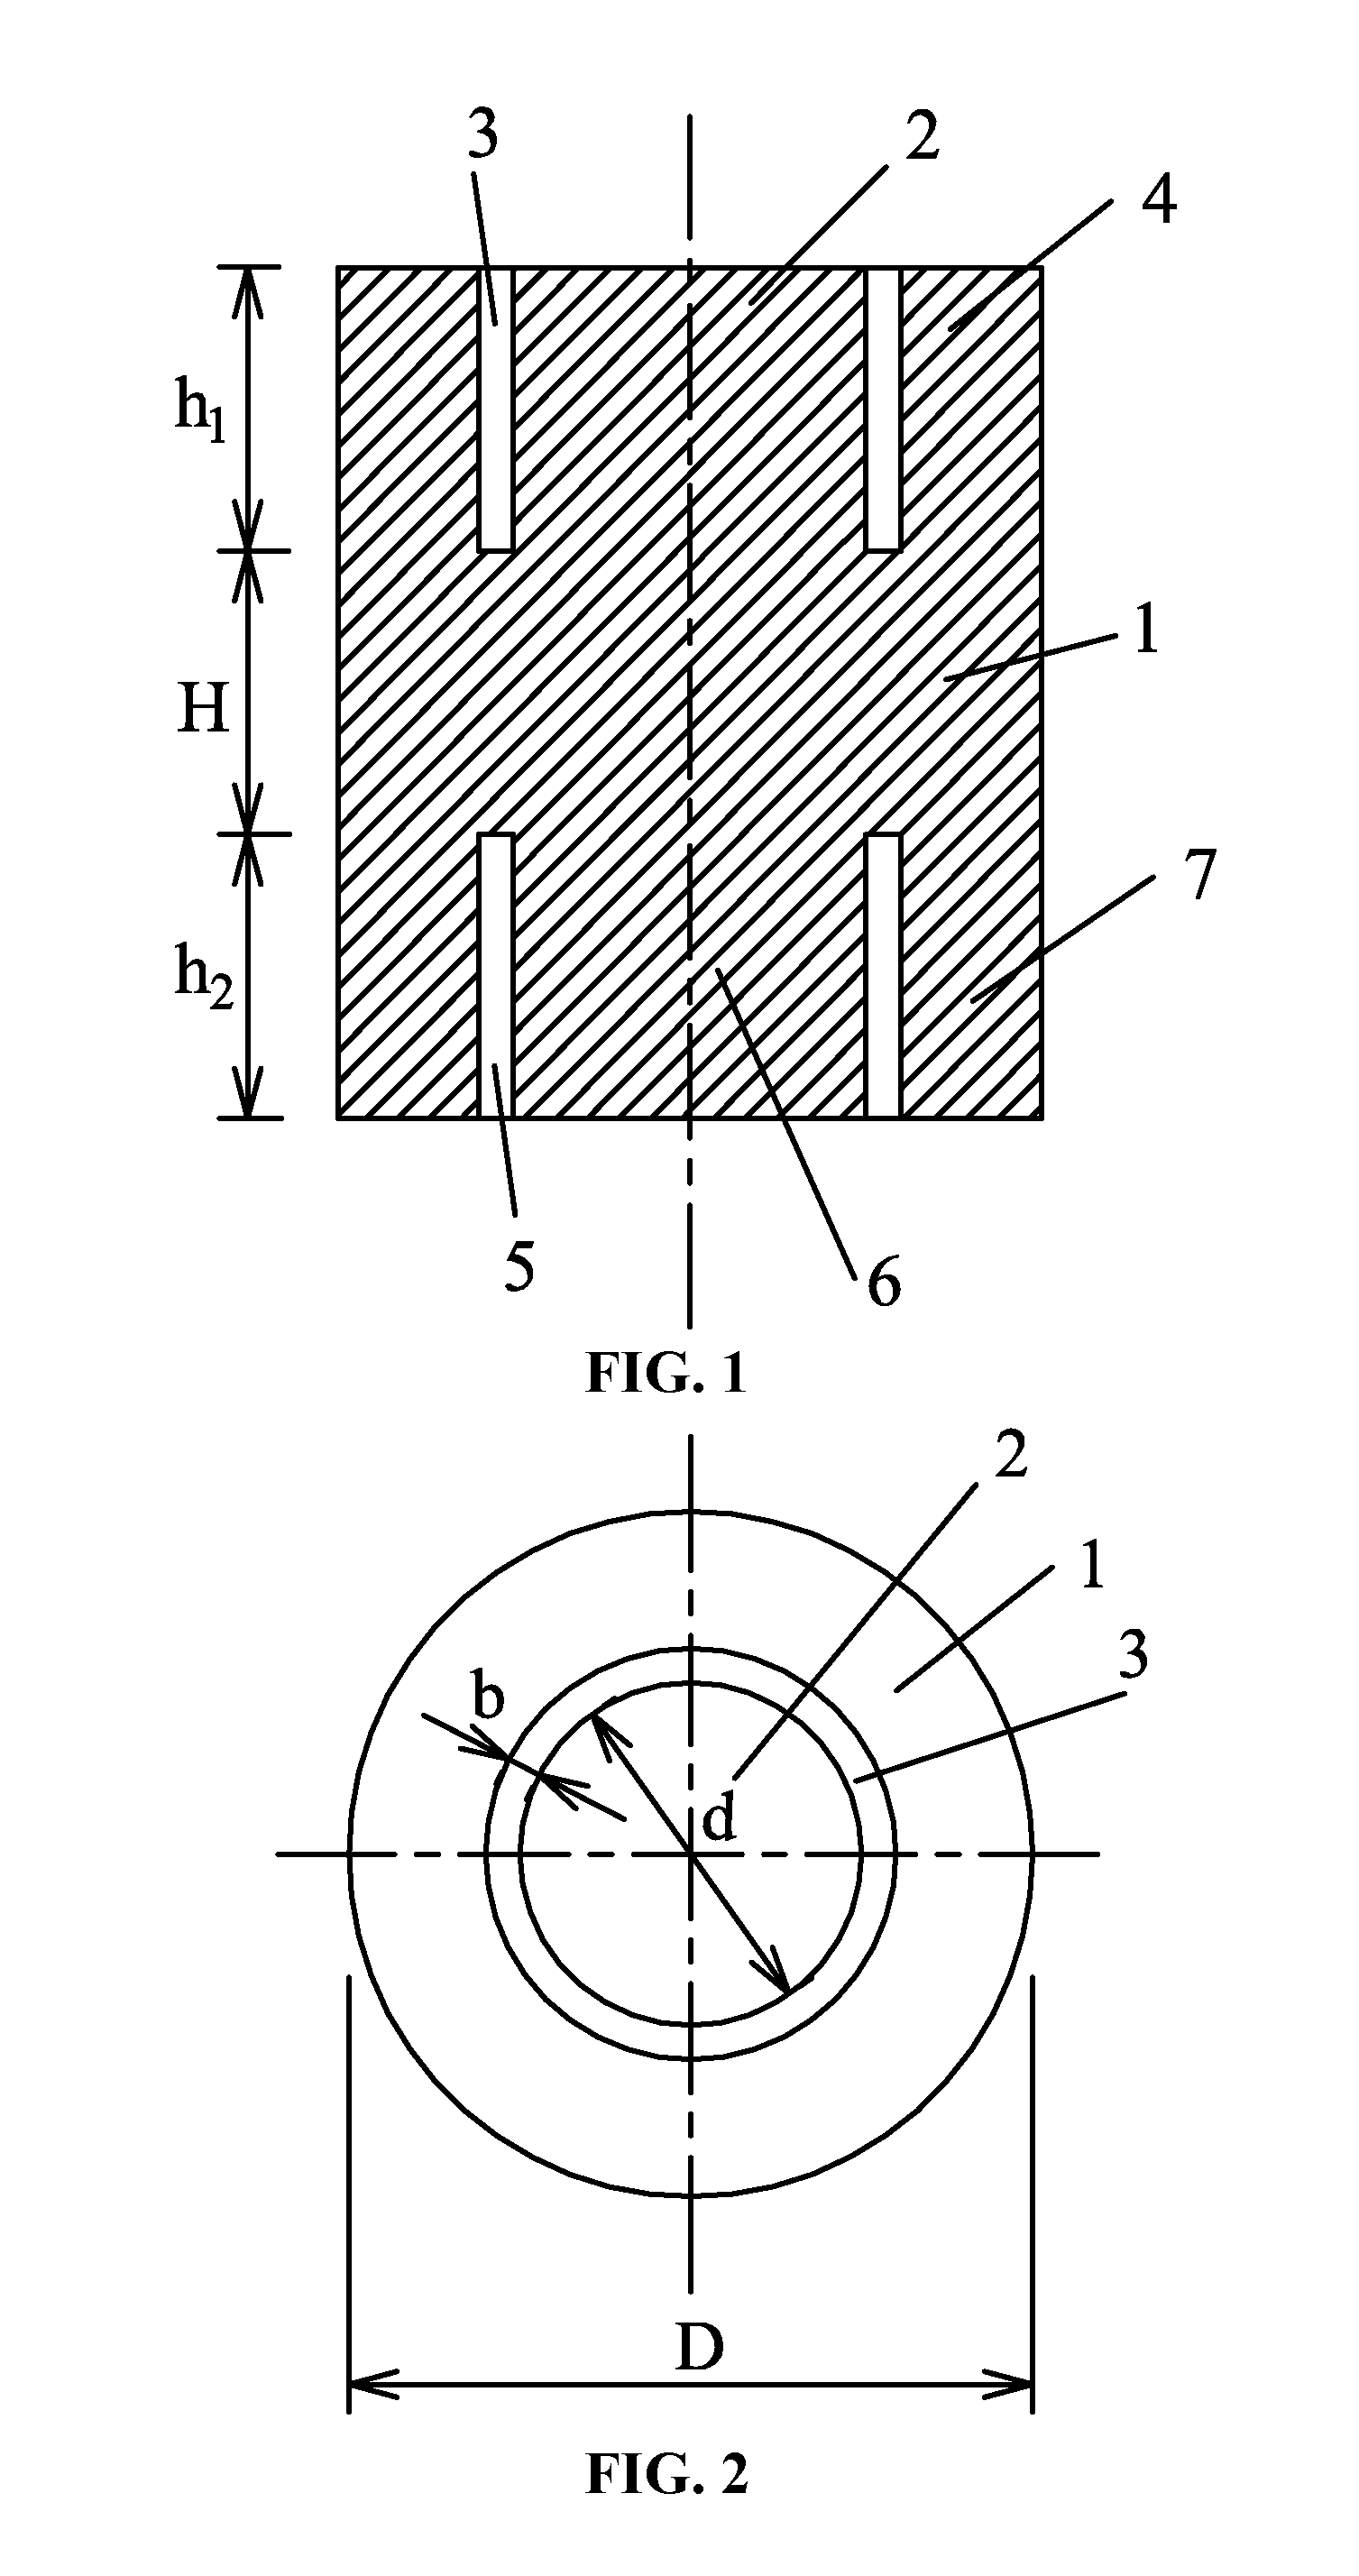 Rock specimen and method for testing pure shear of the same